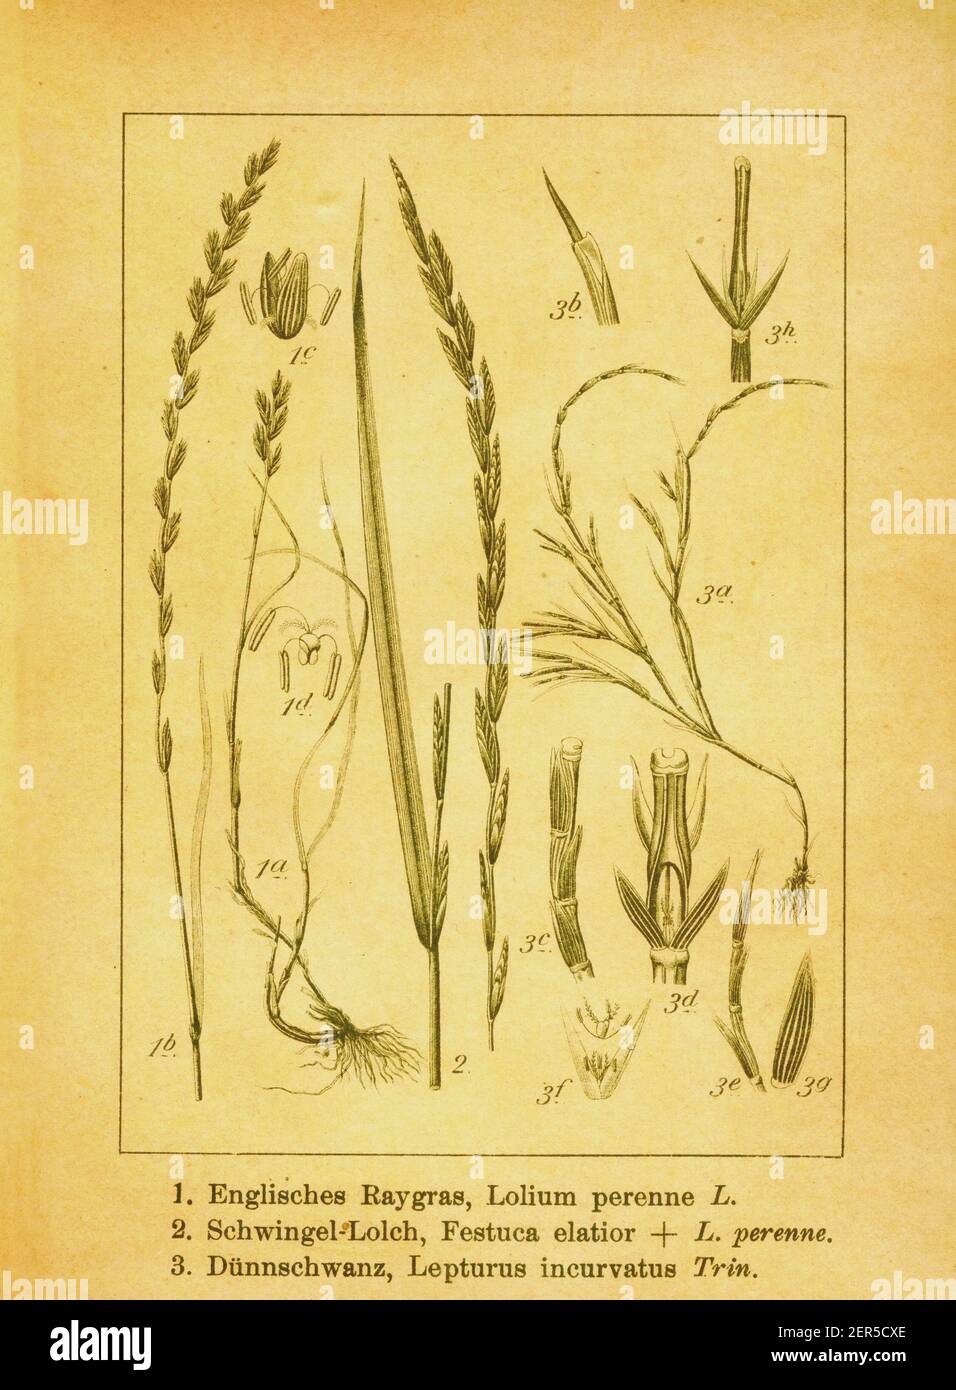 Antique engraving of perennial ryegrass, meadow fescue and curved sicklegrass. Illustration by Jacob Sturm (1771-1848) from the book Deutschlands Flor Stock Photo